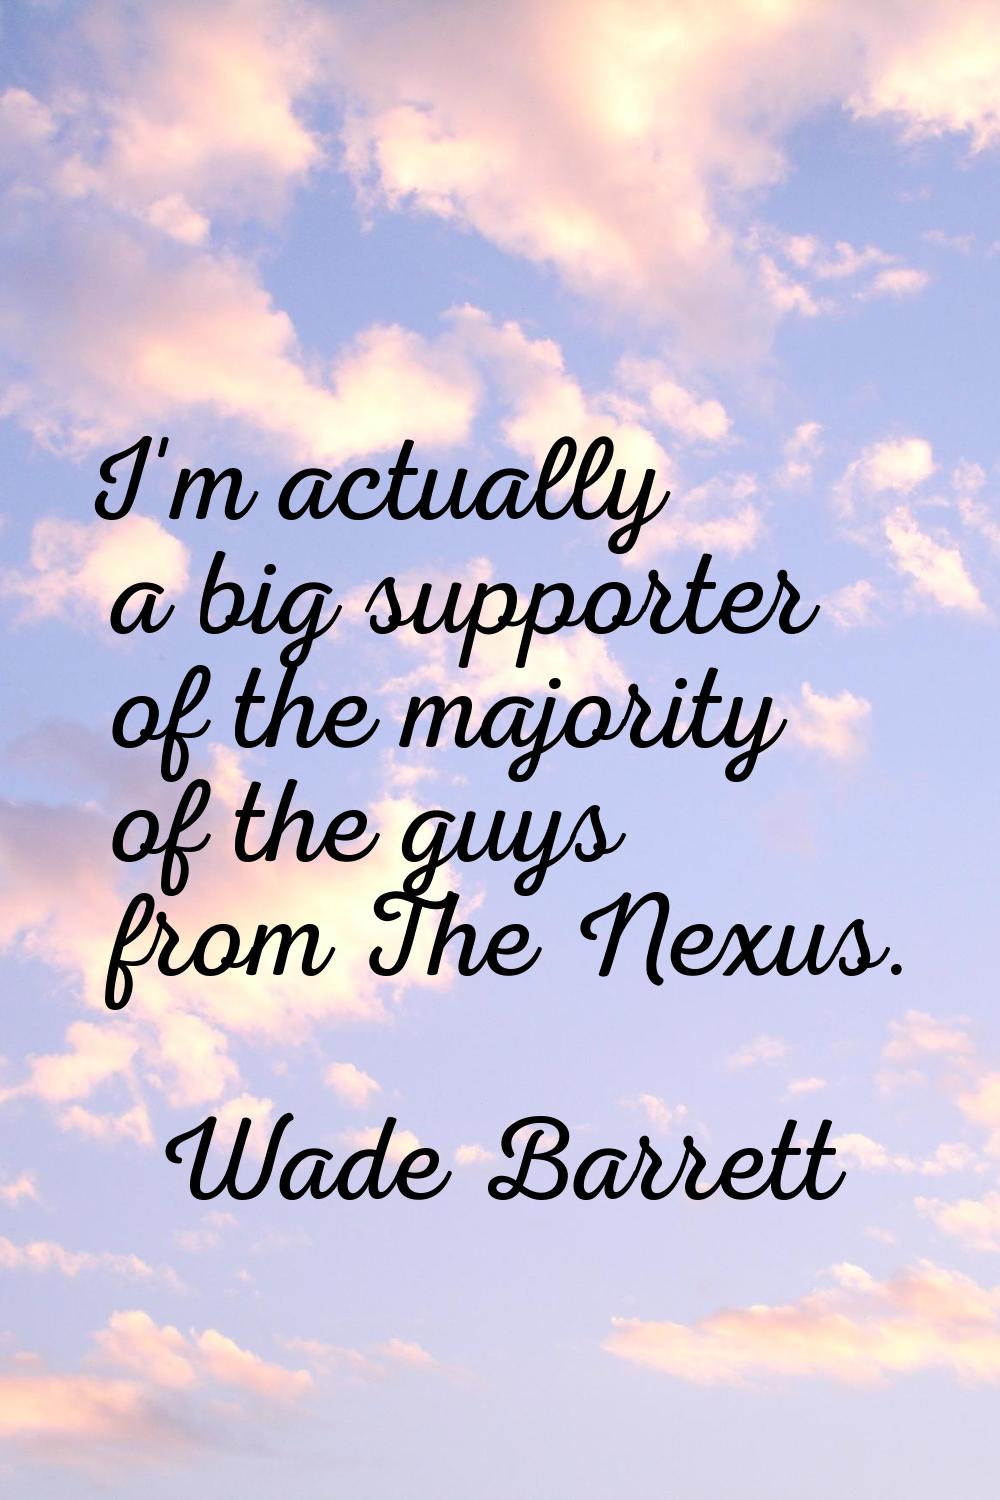 I'm actually a big supporter of the majority of the guys from The Nexus.